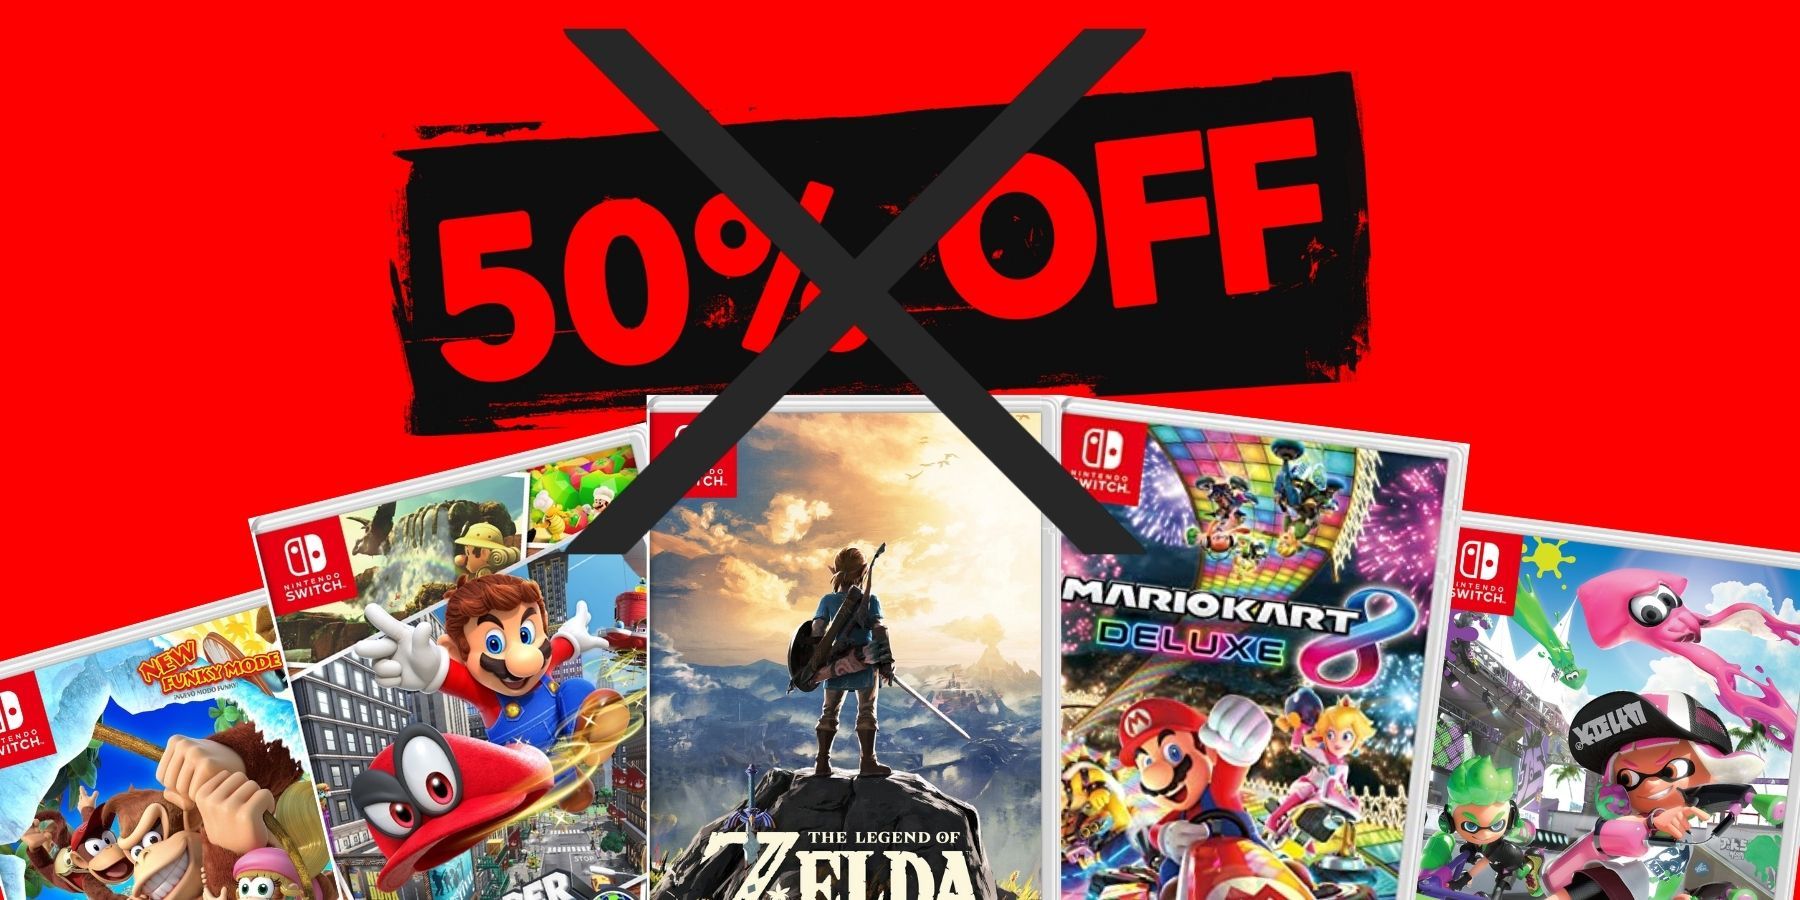 Why Nintendo Almost Go on or Get Discounted